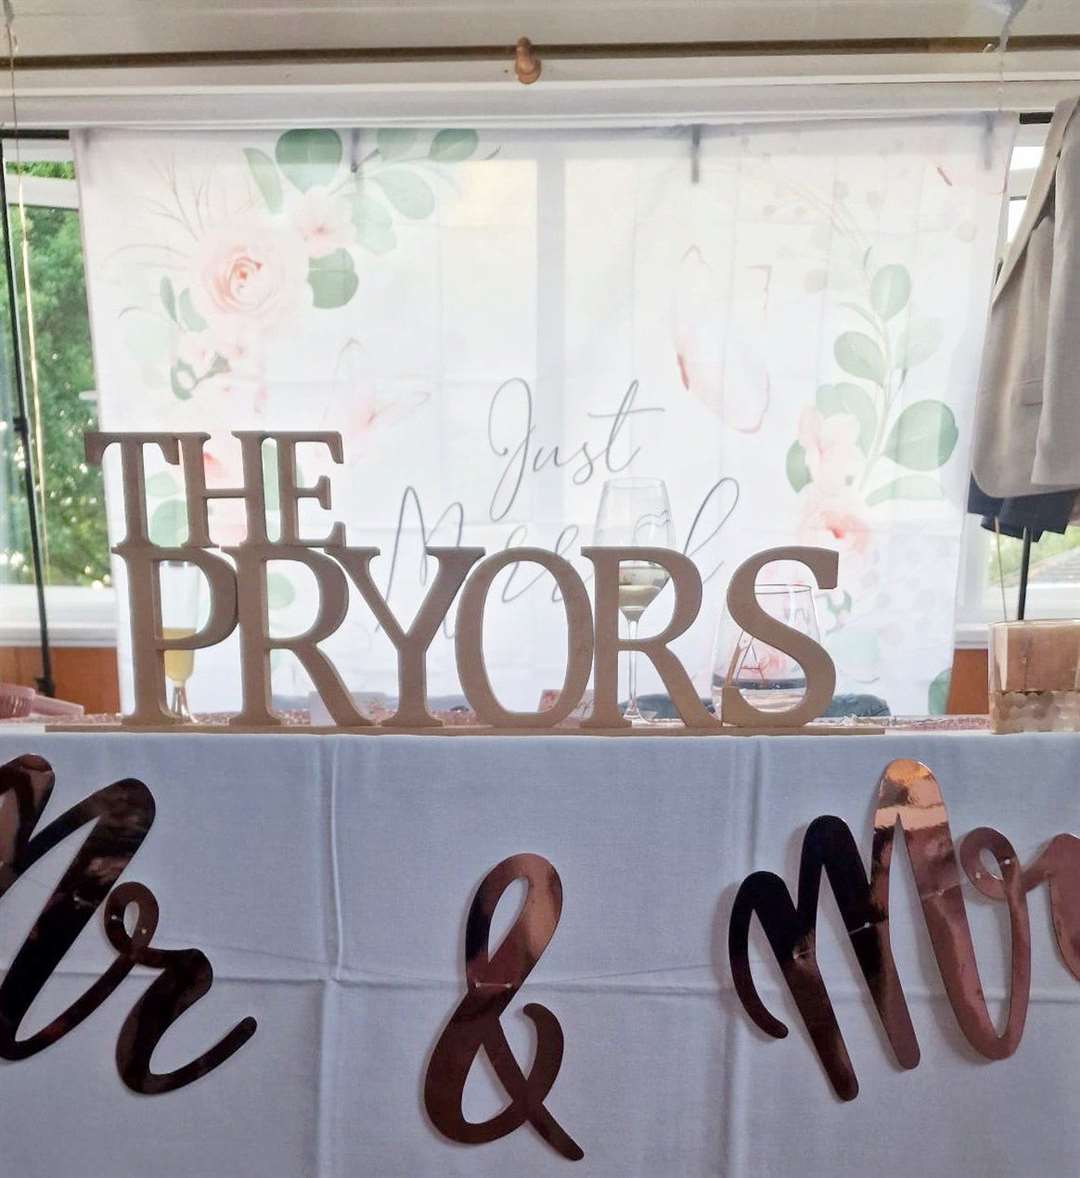 The Pryors got married in Ashford on June 8. Picture: SWNS